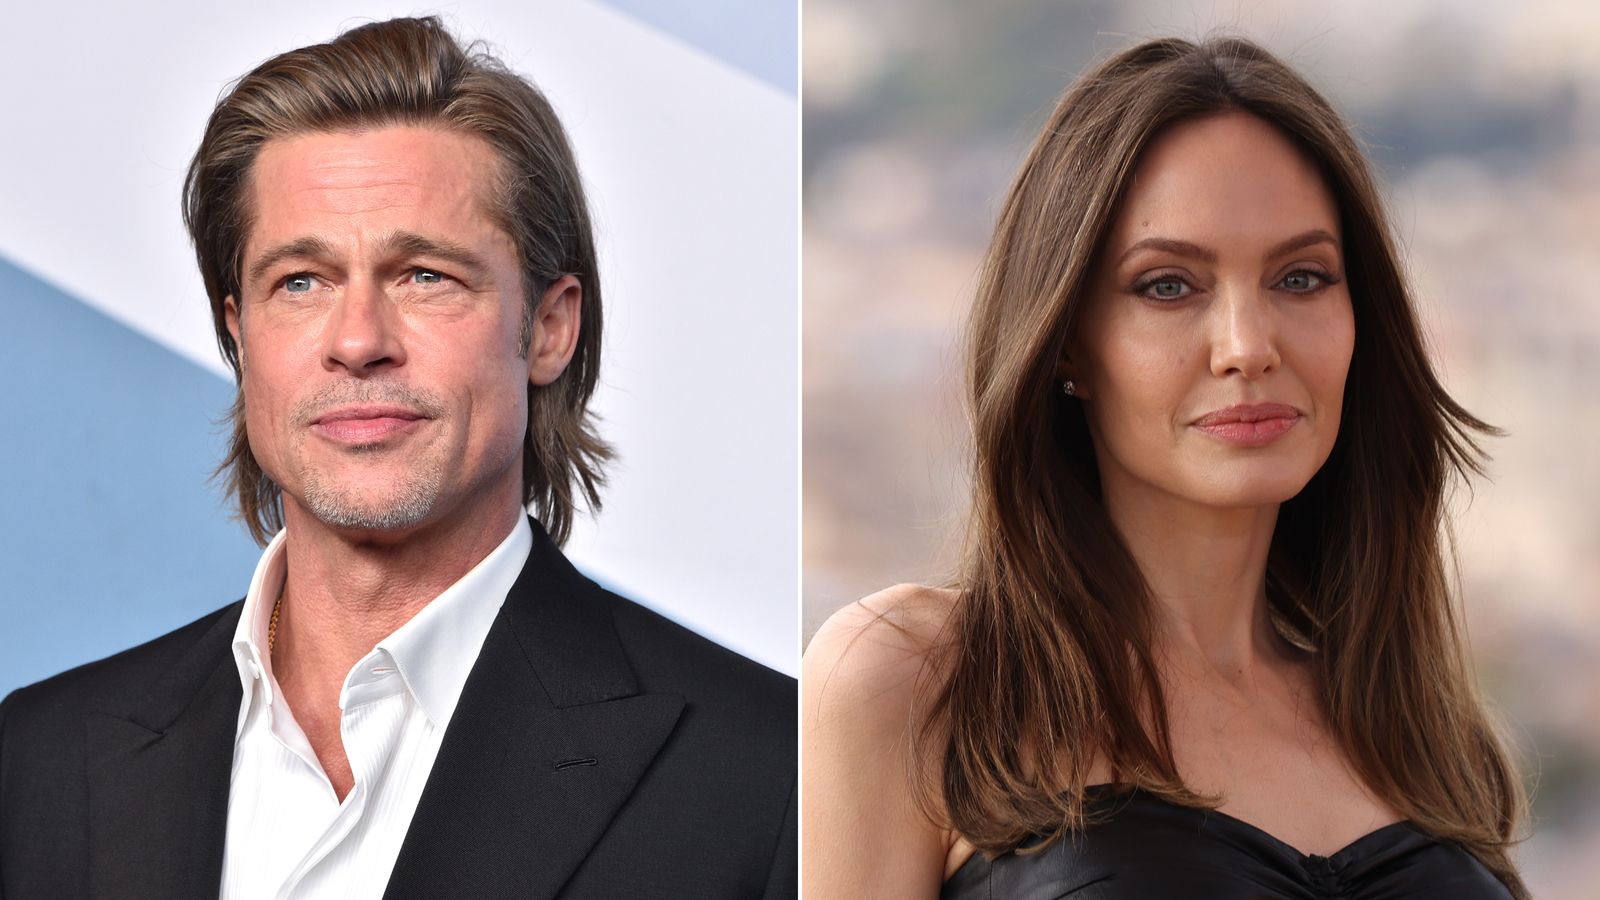 Brad Pitt denounced Angelina Jolie but had almost no effect on the actress's spirit